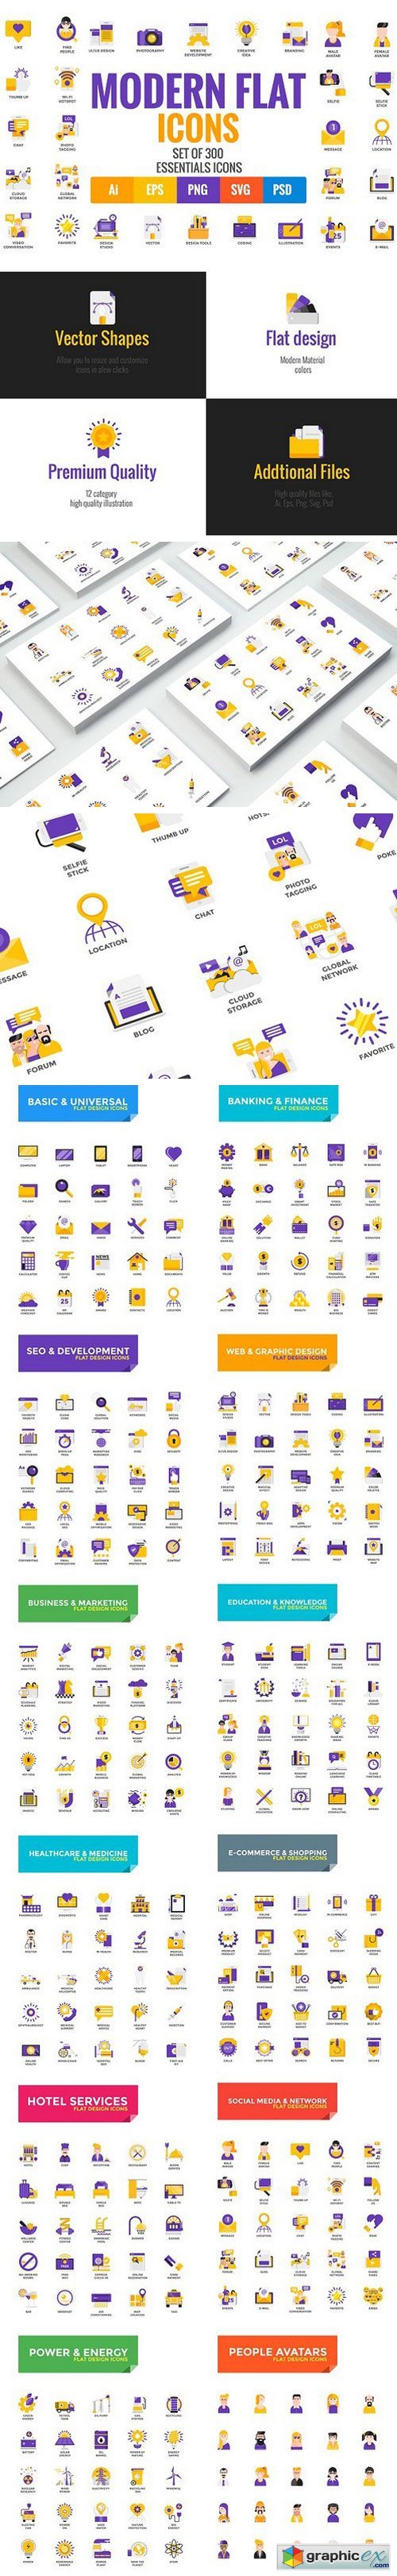 Big Collection of Modern icons